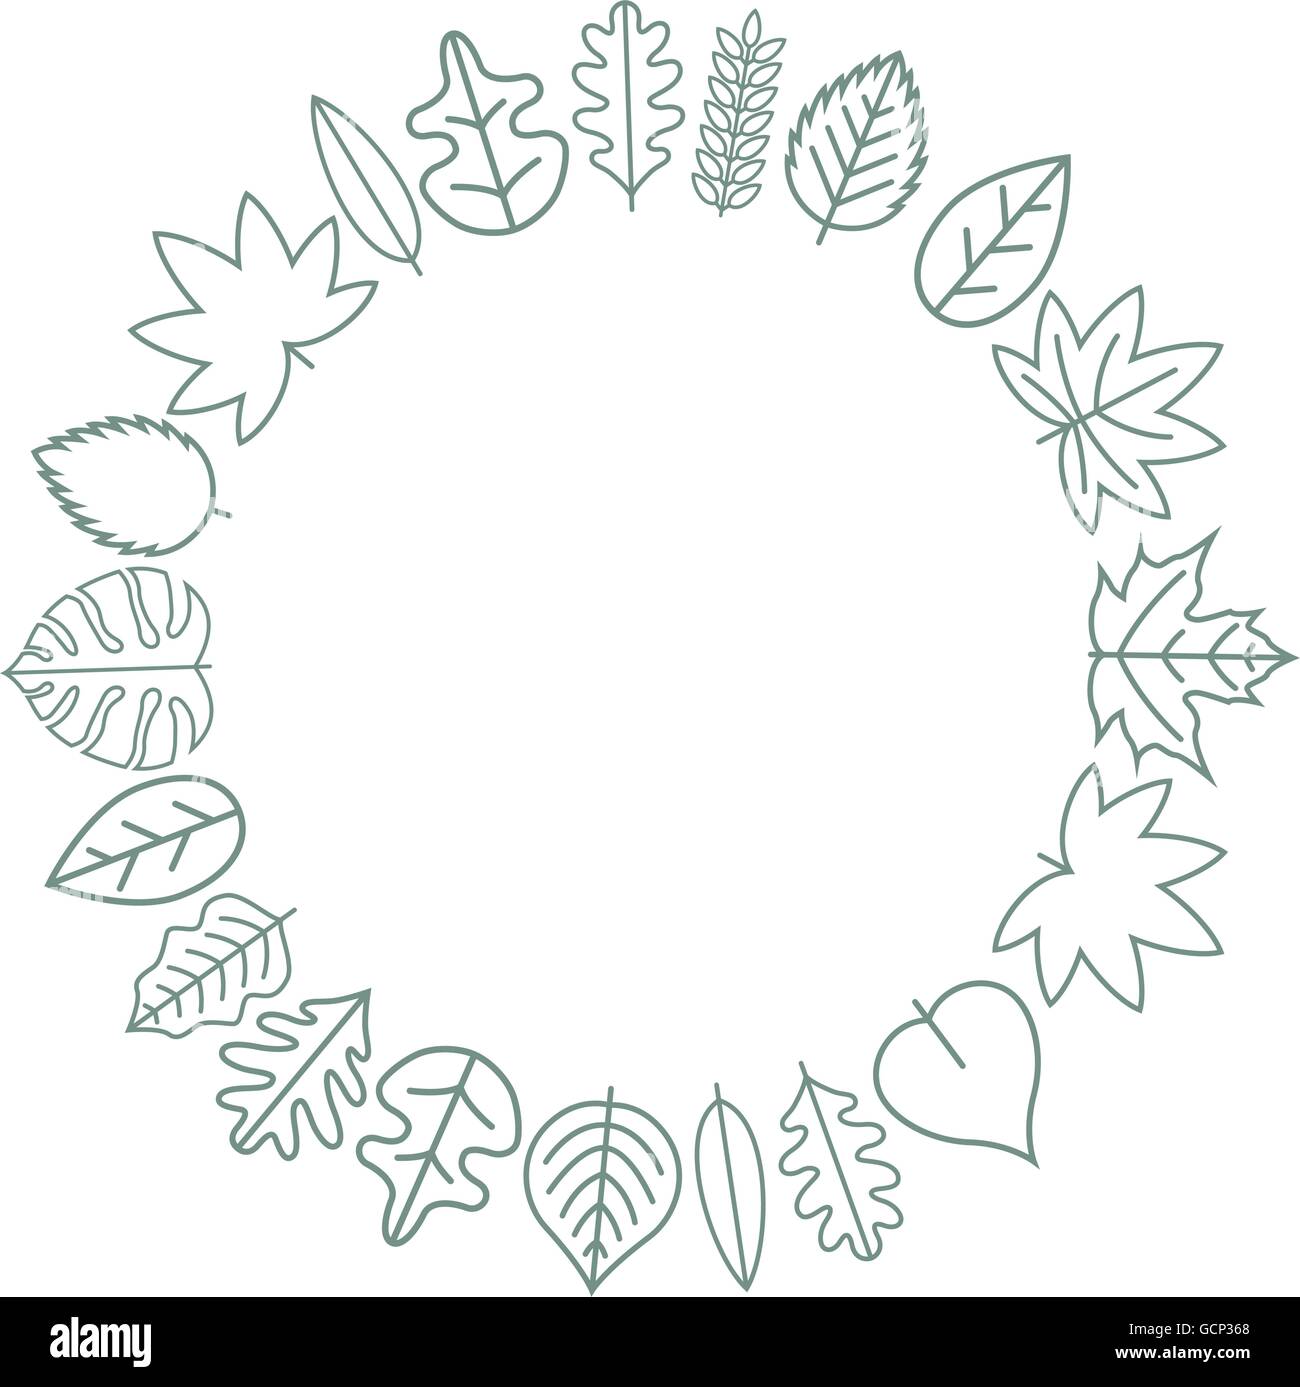 Vector texture and frame with various leaf icons. Stock Vector